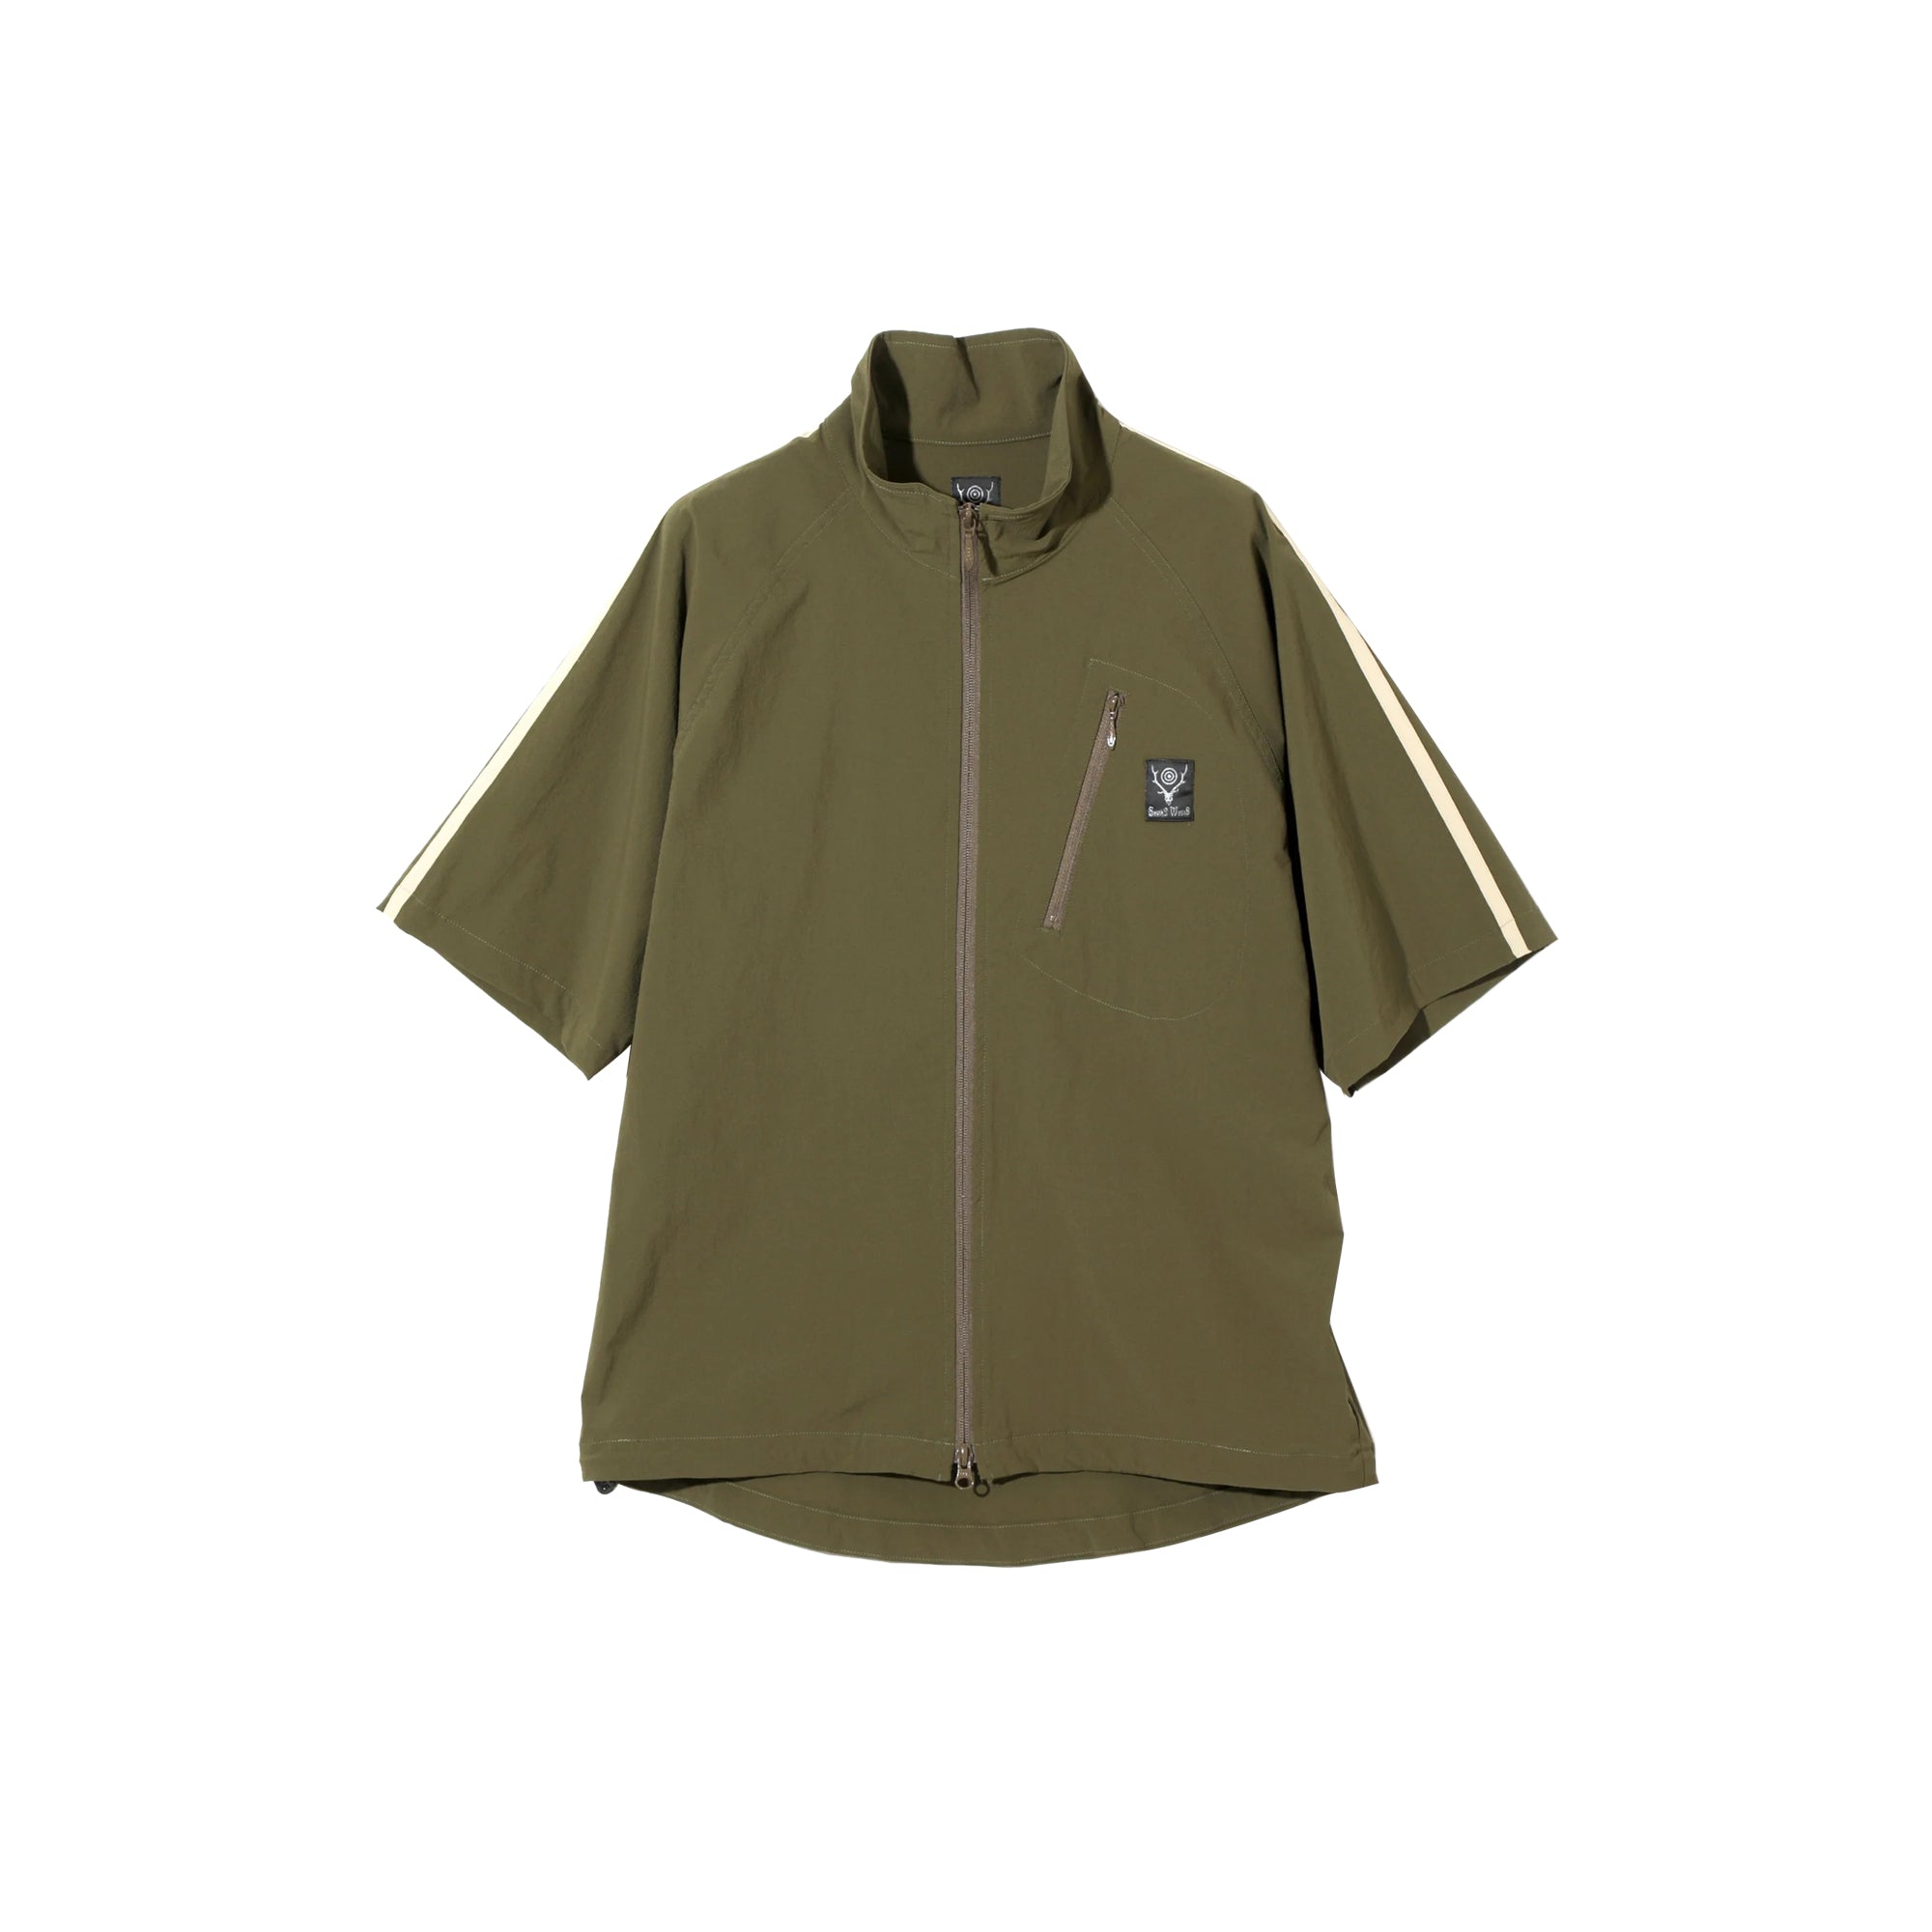 South2 West8 Mens Zipped Trail Shirt – Extra Butter